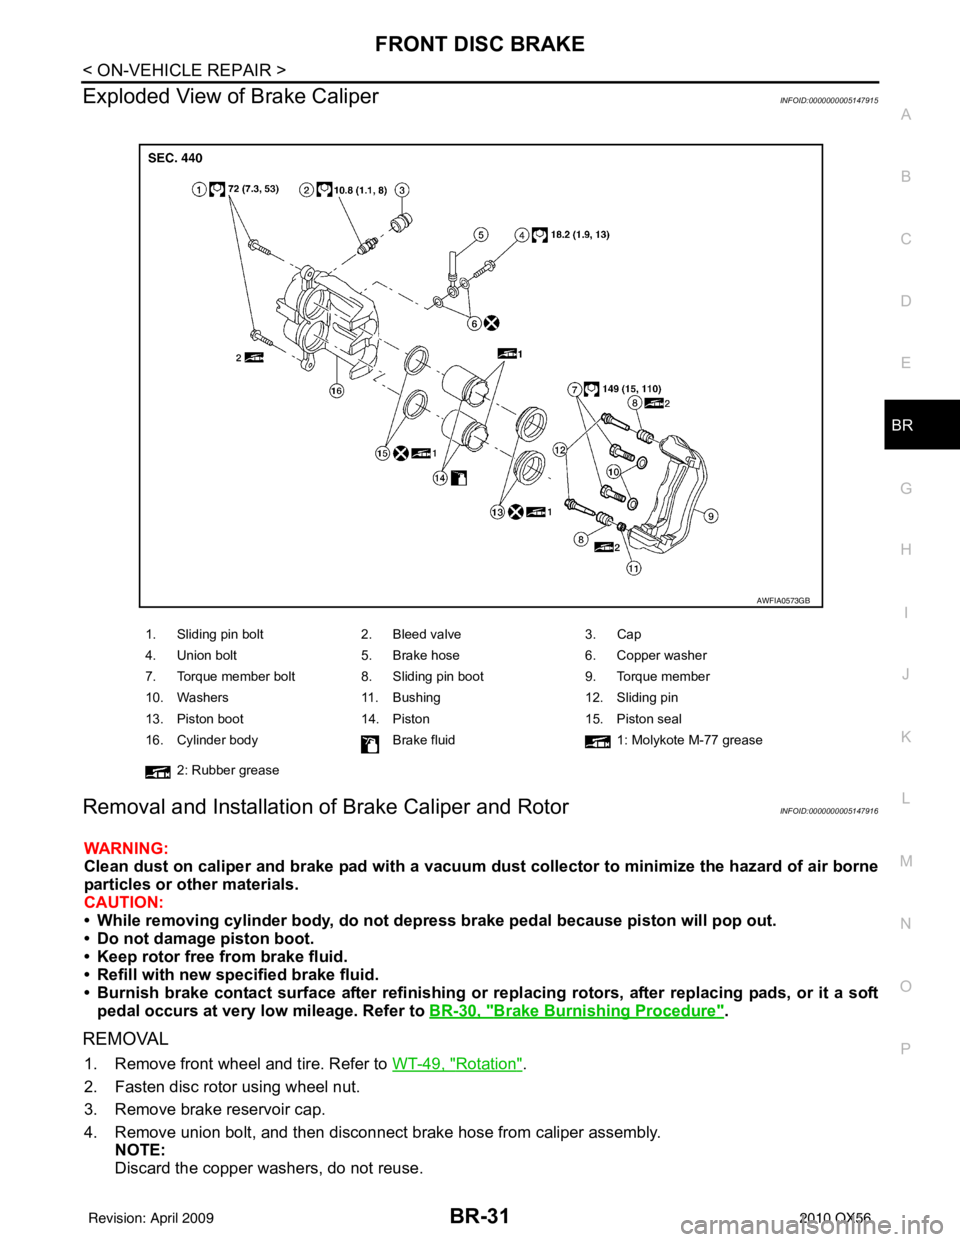 INFINITI QX56 2010  Factory Service Manual FRONT DISC BRAKEBR-31
< ON-VEHICLE REPAIR >
C
DE
G H
I
J
K L
M A
B
BR
N
O P
Exploded View of Brake CaliperINFOID:0000000005147915
Removal and Installation of  Brake Caliper and RotorINFOID:00000000051